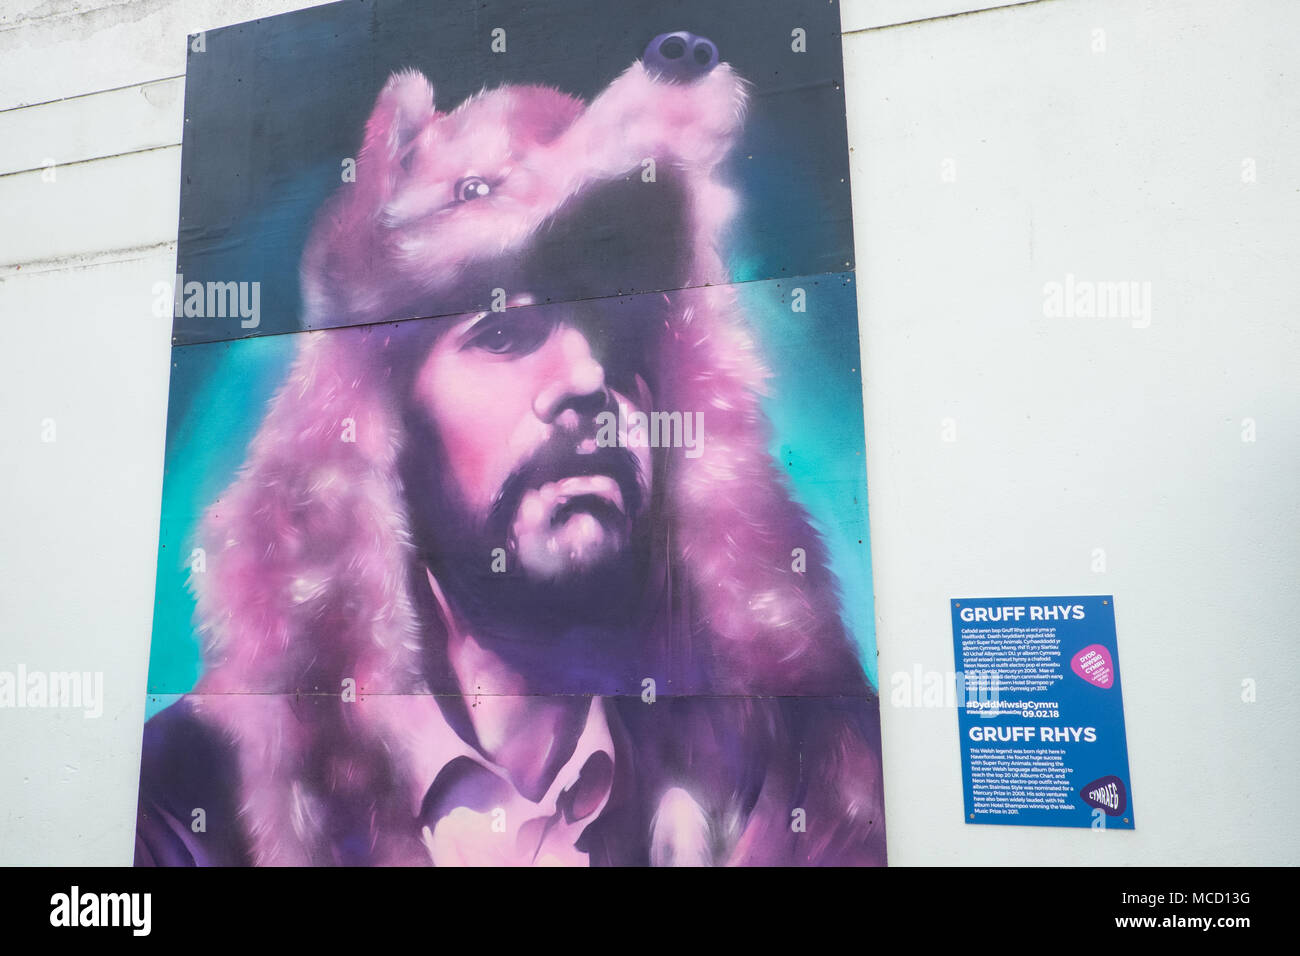 Large,poster,of,Gruff Rhys,musician,band,Super Furry Animals,singer,product,birthplace,of,Haverfordwest,Pembrokeshire,West,Wales,Wales,Welsh,UK,U.K., Stock Photo